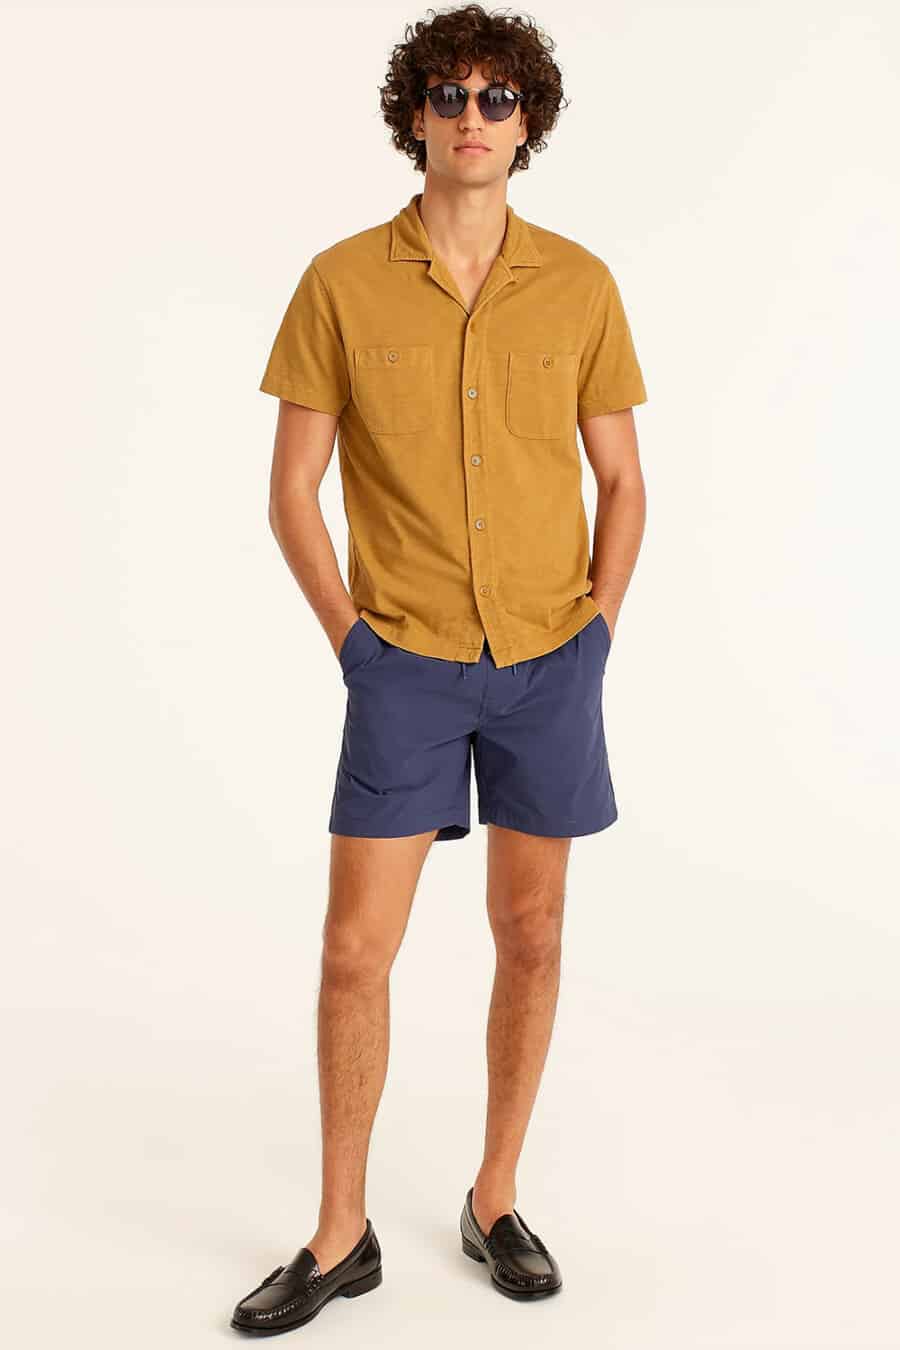 Men's navy swim shorts, yellow short sleeve Cuban collar shirt and black leather penny loafers outfit